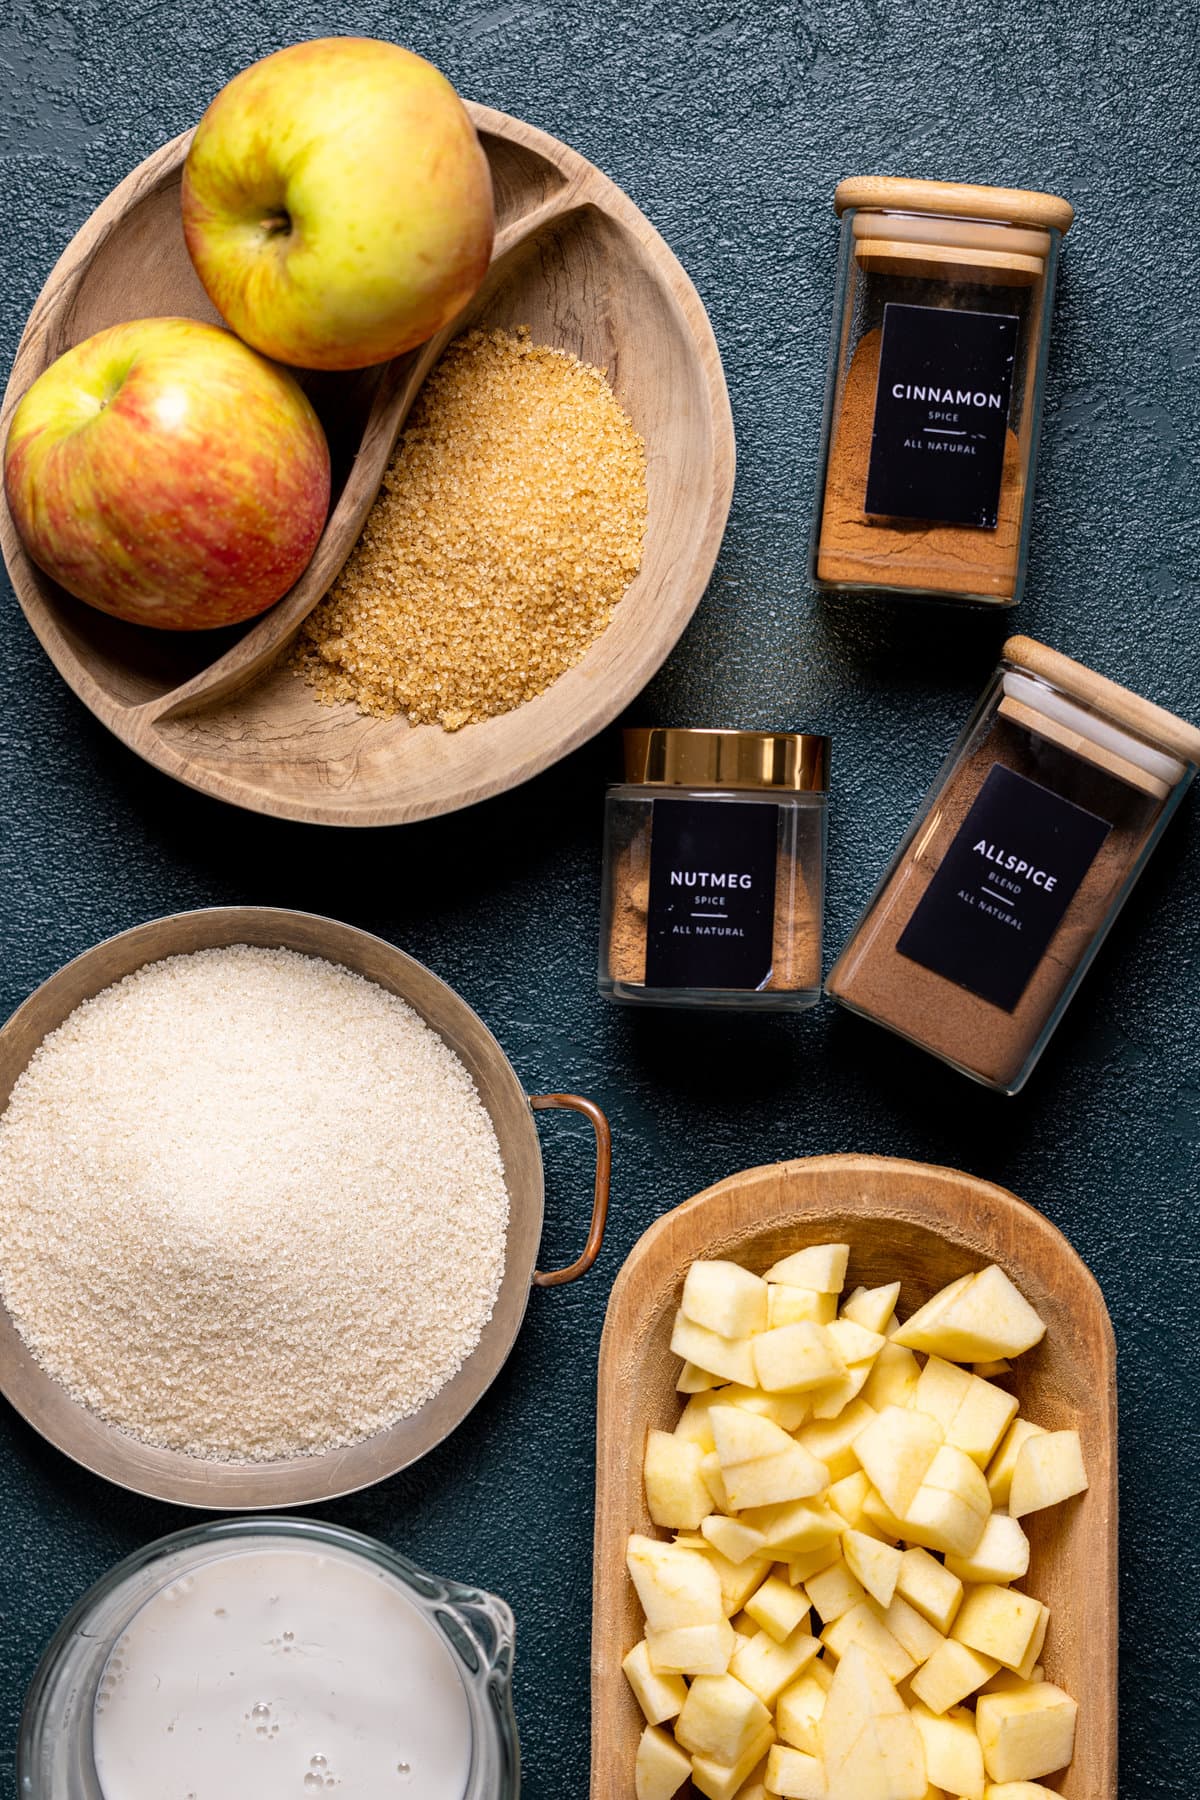 Ingredients for Apple Cinnamon Olive Oil Cake including apples, nutmeg, and allspice